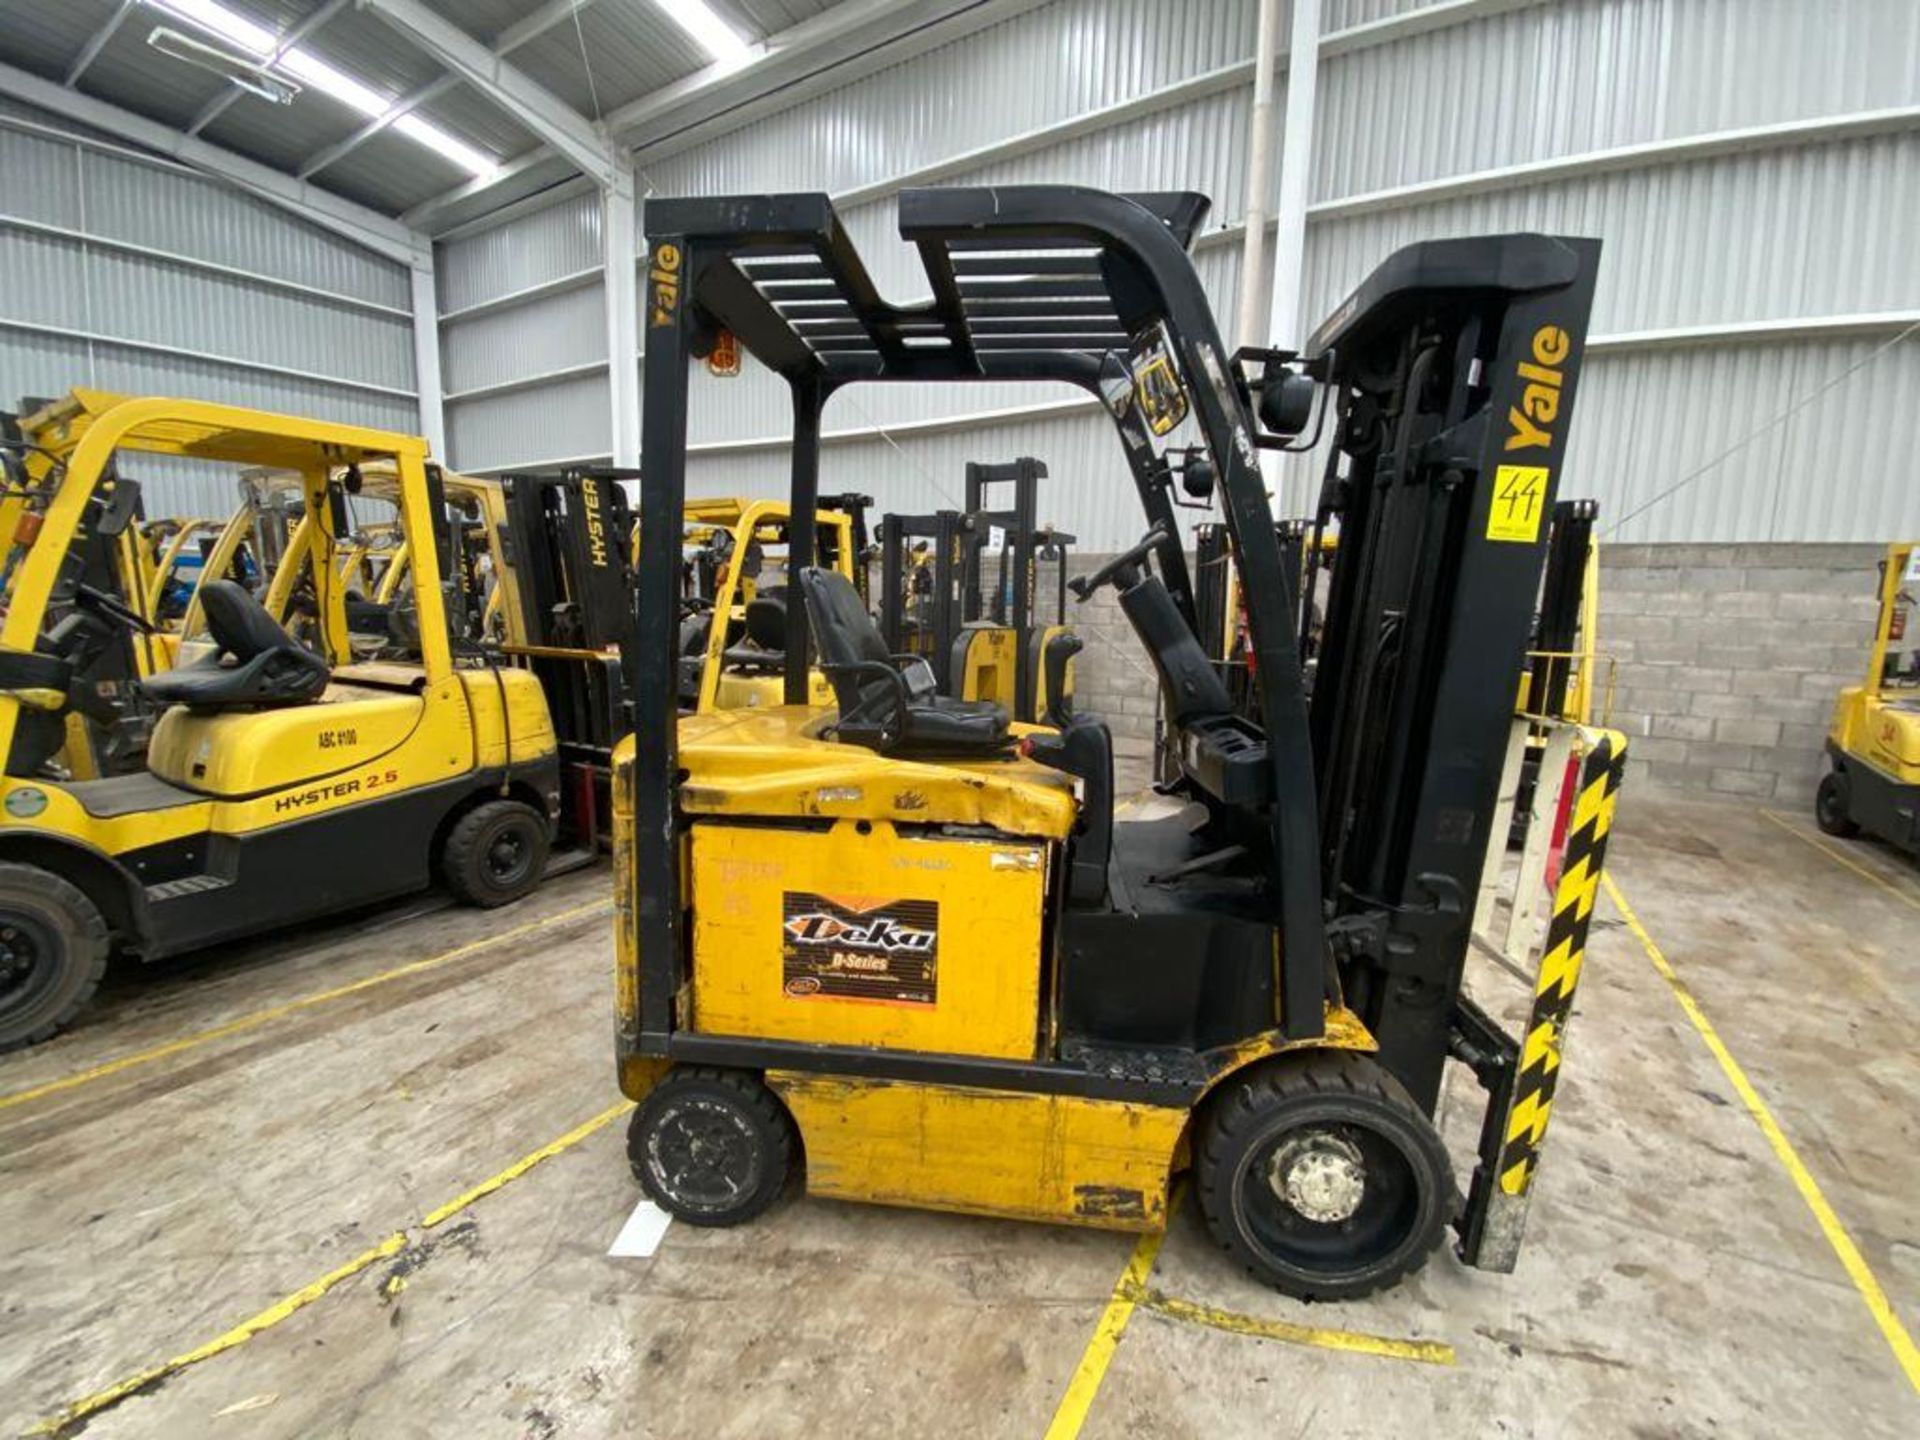 Yale Electric Forklift, Model ERC060VGN36TE088, S/N A968N17882R, Year 2017, 5800 lb capacity - Image 7 of 44